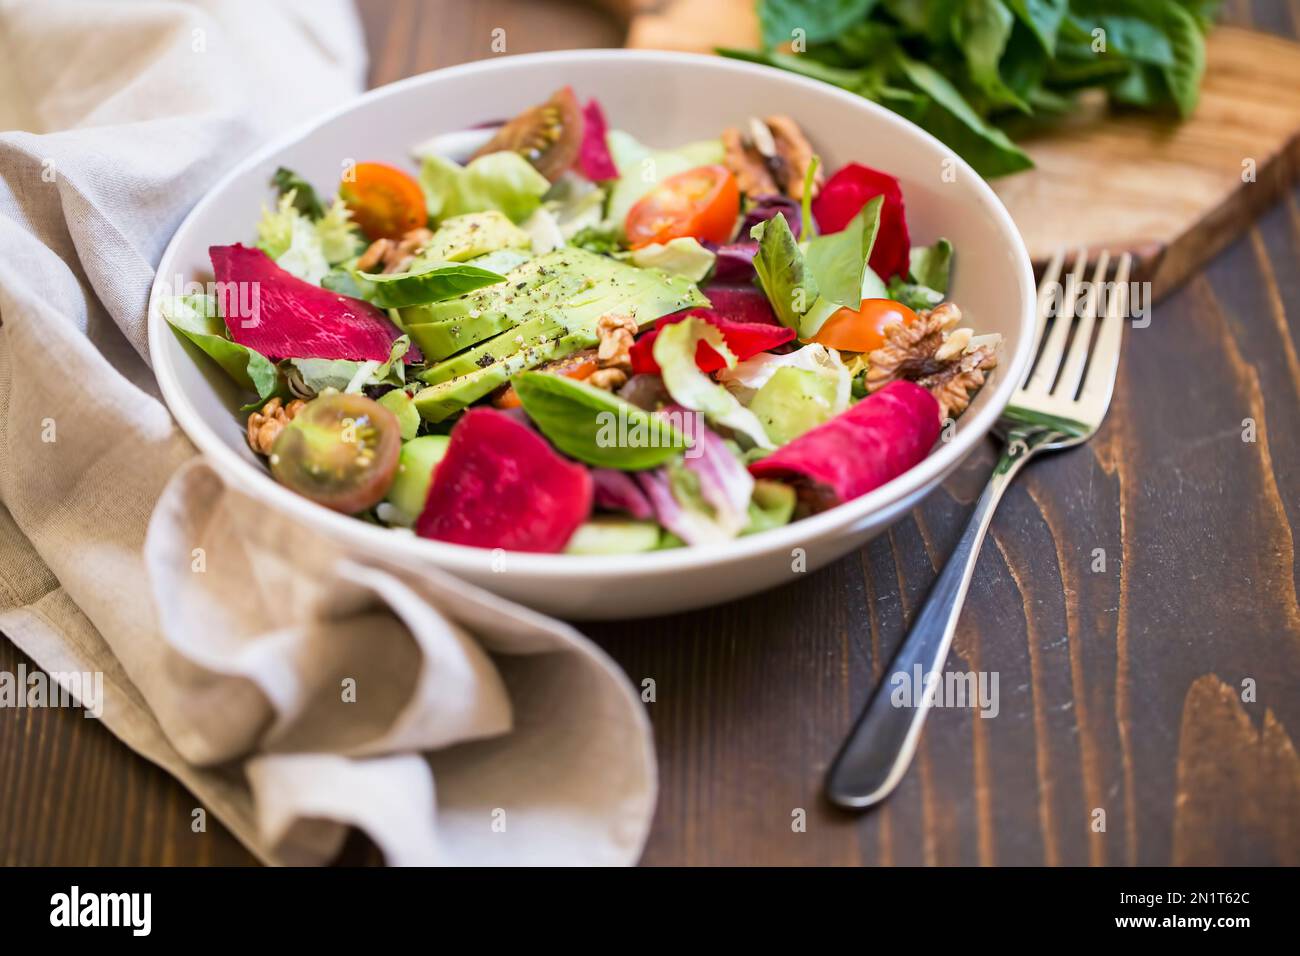 Fresh summer salad with avocado, lettuce , beet , nuts and seeds. Summer healthy vegan salad on wooden table, clean eating Stock Photo